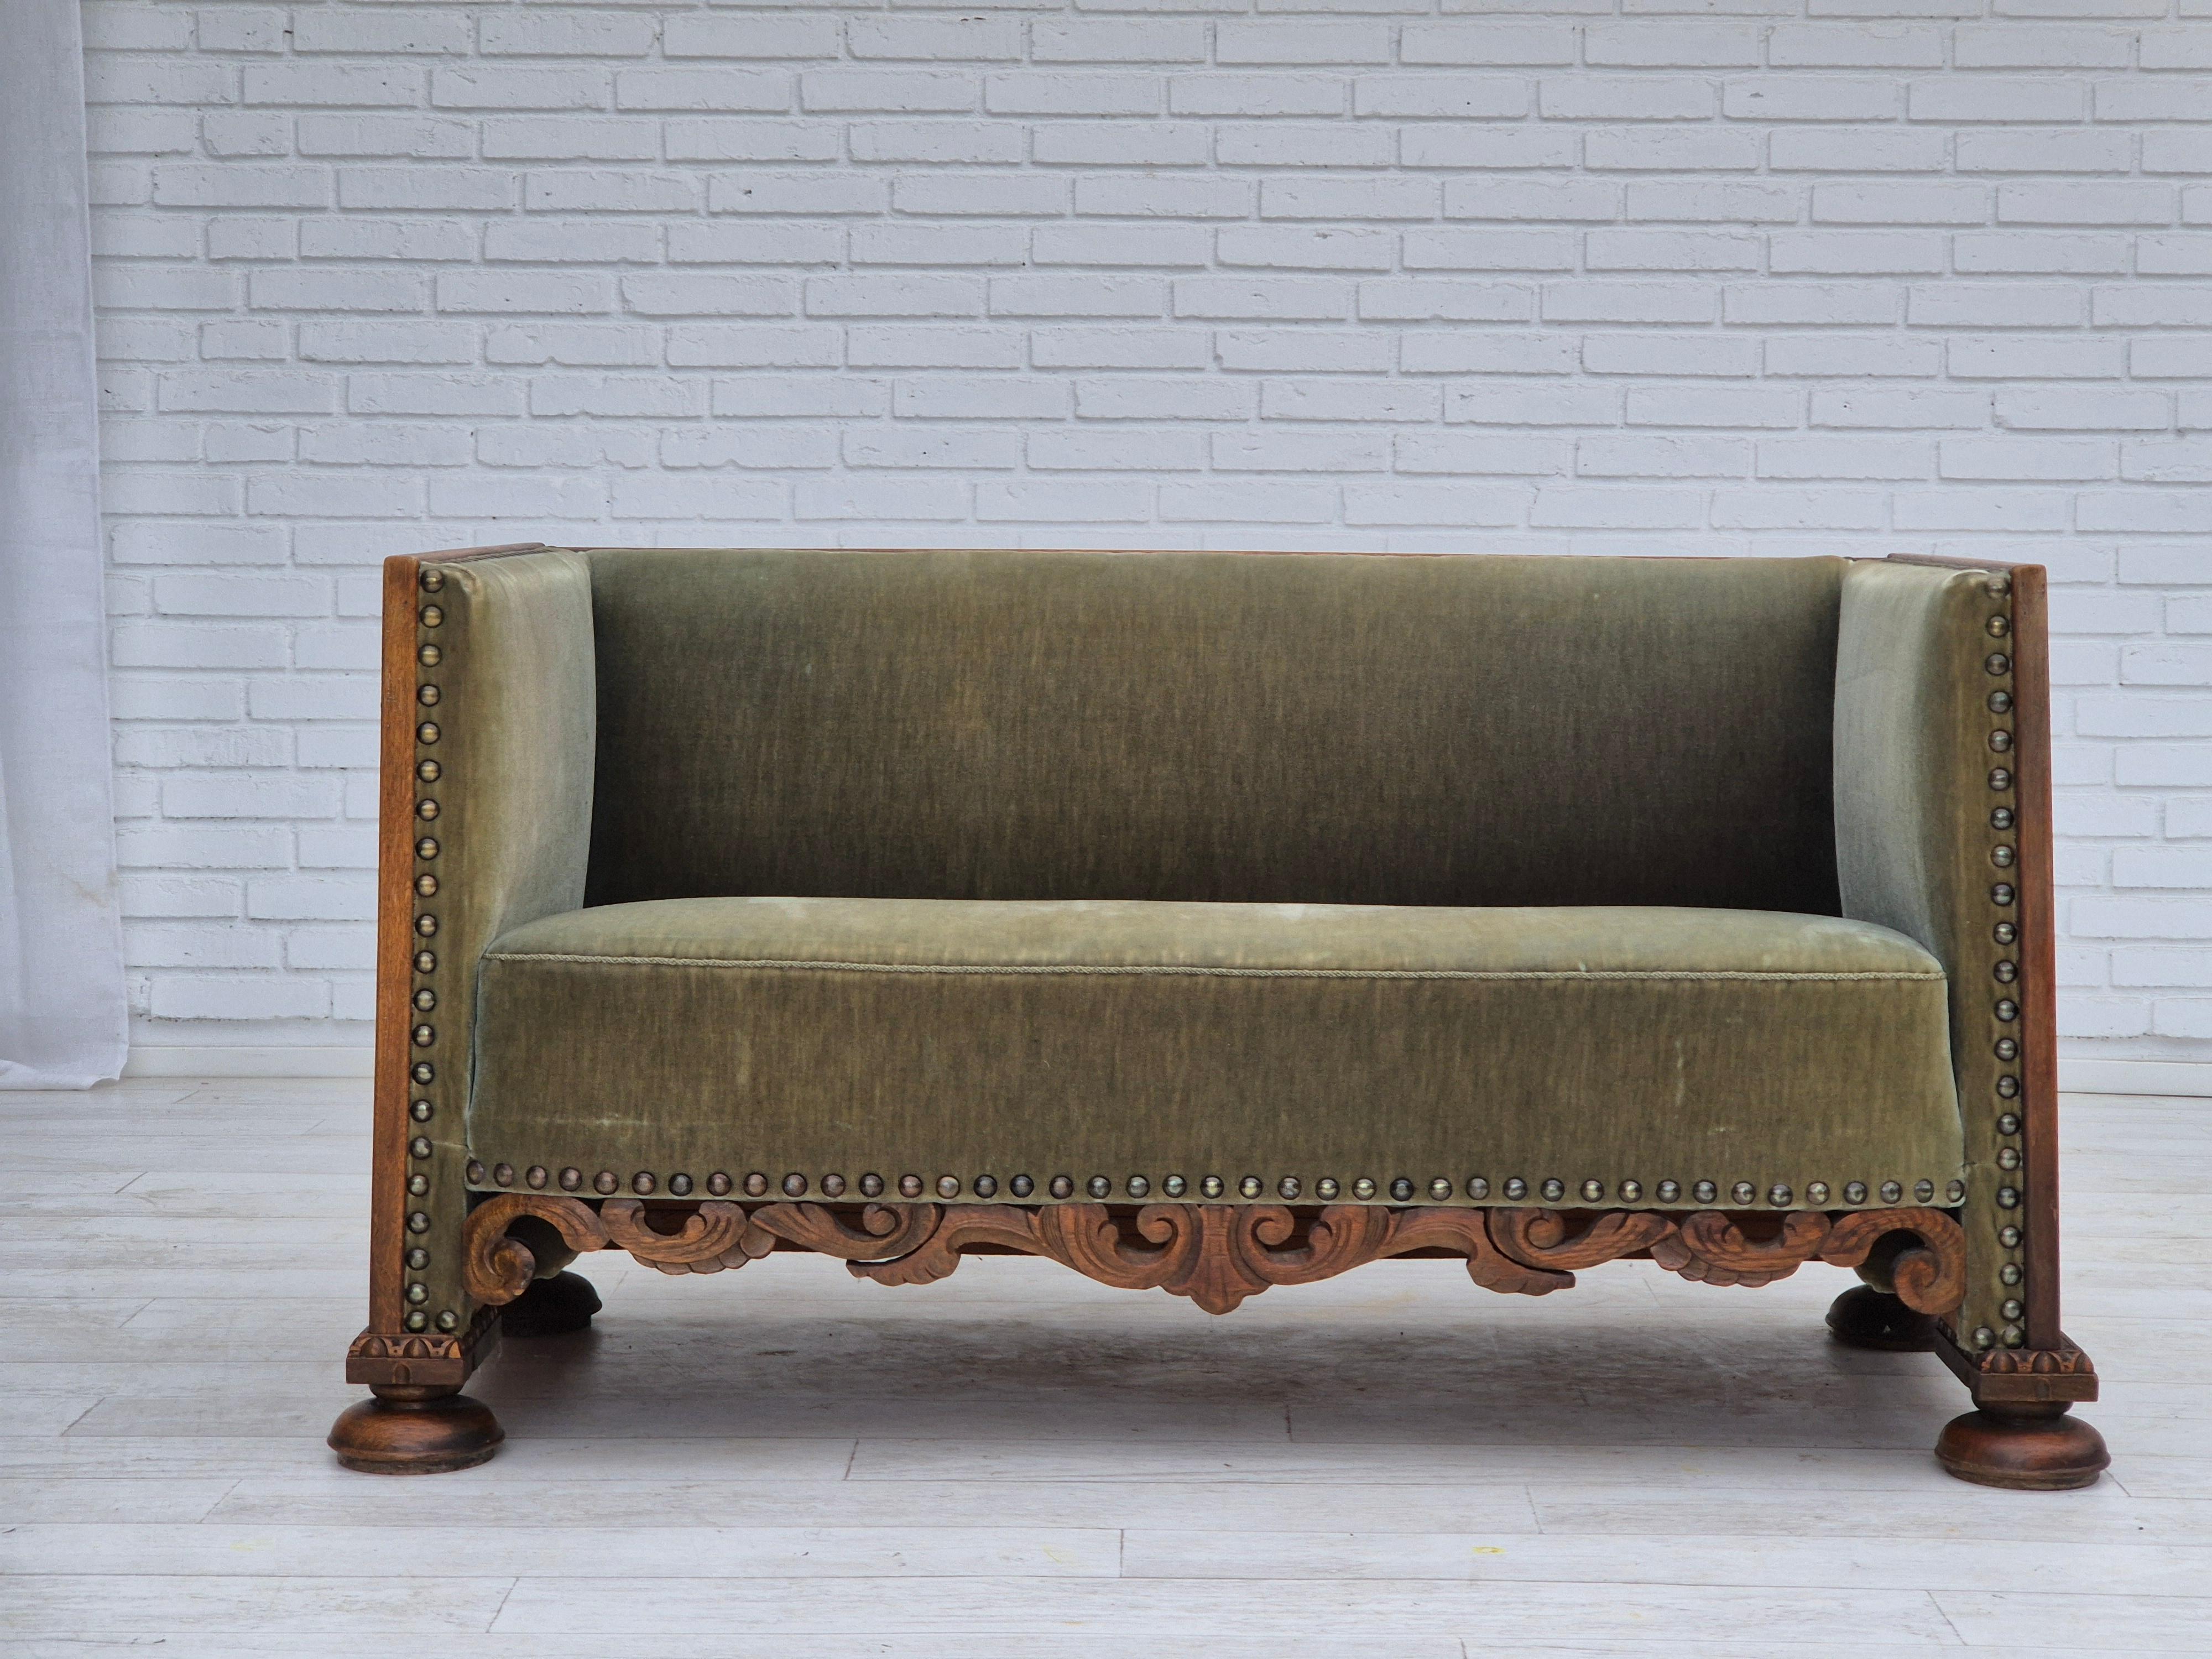 1950s, Danish 2 seater sofa in original good condition: no smells and no stains. Light green furniture velour, oak wood. Brass springs in the seat. Manufactured by Danish furniture manufacturer in about 1950-55s.